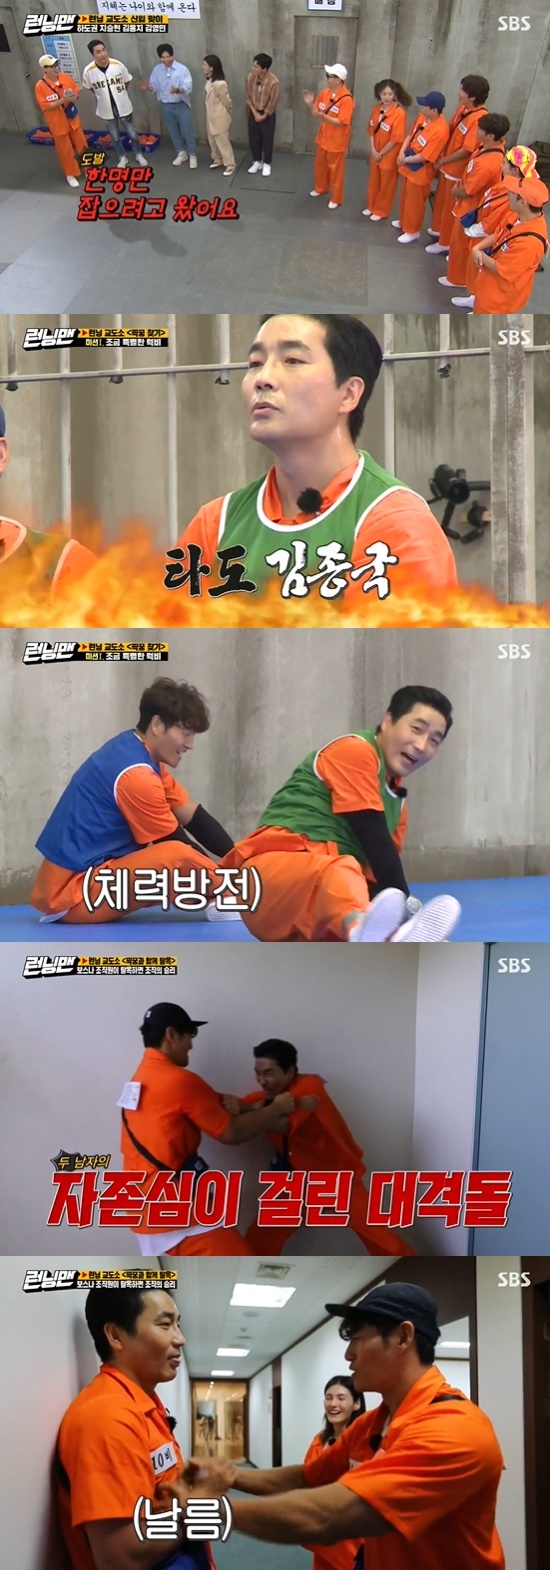 Running Man Ha Do-kwon faces Kim Jong-kook to the endOn the 9th, SBS entertainment program Sunday is good - Running Man (hereinafter referred to as Running Man), a breakout race was held.The running prison featured new inmates Kim Yung-min, Ha Do-kwon, Kim Yongji and Ji Seung-hyun.Yoo Jae-Suk was a role of once and on occasion in the world of couples about Kim Yung-min.But in fact, after five years of devotion, I was married for 13 years, what is reality? Kim Yung-min said, Is it a good husband to listen to? Then, Yoo Jae-Suk said, Shes out. Baro Kim Yung-min called Baro Out of her and devastated the scene.The members laughed, Suddenly it becomes a kandol.Ha Do-kwon declared war on Kim Jong-kook, saying he seemed to be fighting for power.Ha Do-kwon was only looking for Kim Jong-kook from his first edification activity a little special rugby.Ha Do-kwon marked Kim Jong-kook only after declaring, I will not see the ball and finally see my brother.But Ha Do-kwon was laughing when he fell out of a struggle regardless of the ball.Asked if he was okay, Ha Do-kwon also showed off his candid charm by saying Im not okay. Then the ball fell in front of the two.Ha Do-kwon passed the ball to Song Ji-hyo, overtaking Kim Jong-kook, and was linked to the score.Im not this brother, said Ha Do-kwon, who is attached to Kim Jong-kook.Later, when Ha Do-kwon was speechless, the members asked, Did you get pissed? And Ha Do-kwon said, I didnt know it would be so rough.I knew I wanted to do this once, he laughed.Kim Yung-min entered the canteen and then came out with the name tag changing to the golden name tag: I came to draw a big picture and then acquired the defence.The members rumored the false order, and Ha Do-kwon listened quietly and went to the canteen and said, Open the sesame.The final mission to escape after finding a fake wall.Ha Do-kwon revealed his willingness to get Kim Jong-kook out before escaping, luring Kim Jong-kooks mate Kim Yongji and taking Kim Yongjis name tag.However, Kim Yongji had a defense and survived, and Ha Do-kwon was just touching Kim Jong-kooks planting.Ha Do-kwon even tells Kim Jong-kook, Please forgive me once - I was rash.Ha Do-kwon tried to escape with his boss, Seok-jin, but Kim Jong-kook & Kim Yongji was hit.Ha Do-kwon ate a piece of paper with a password, but re-spitted at the word that he gave the product.The final result was Kim Jong-kook & Kim Yongjis escape, and Kim Jong-kook handed the goods to Ha Do-kwon.Photo = SBS Broadcasting Screen